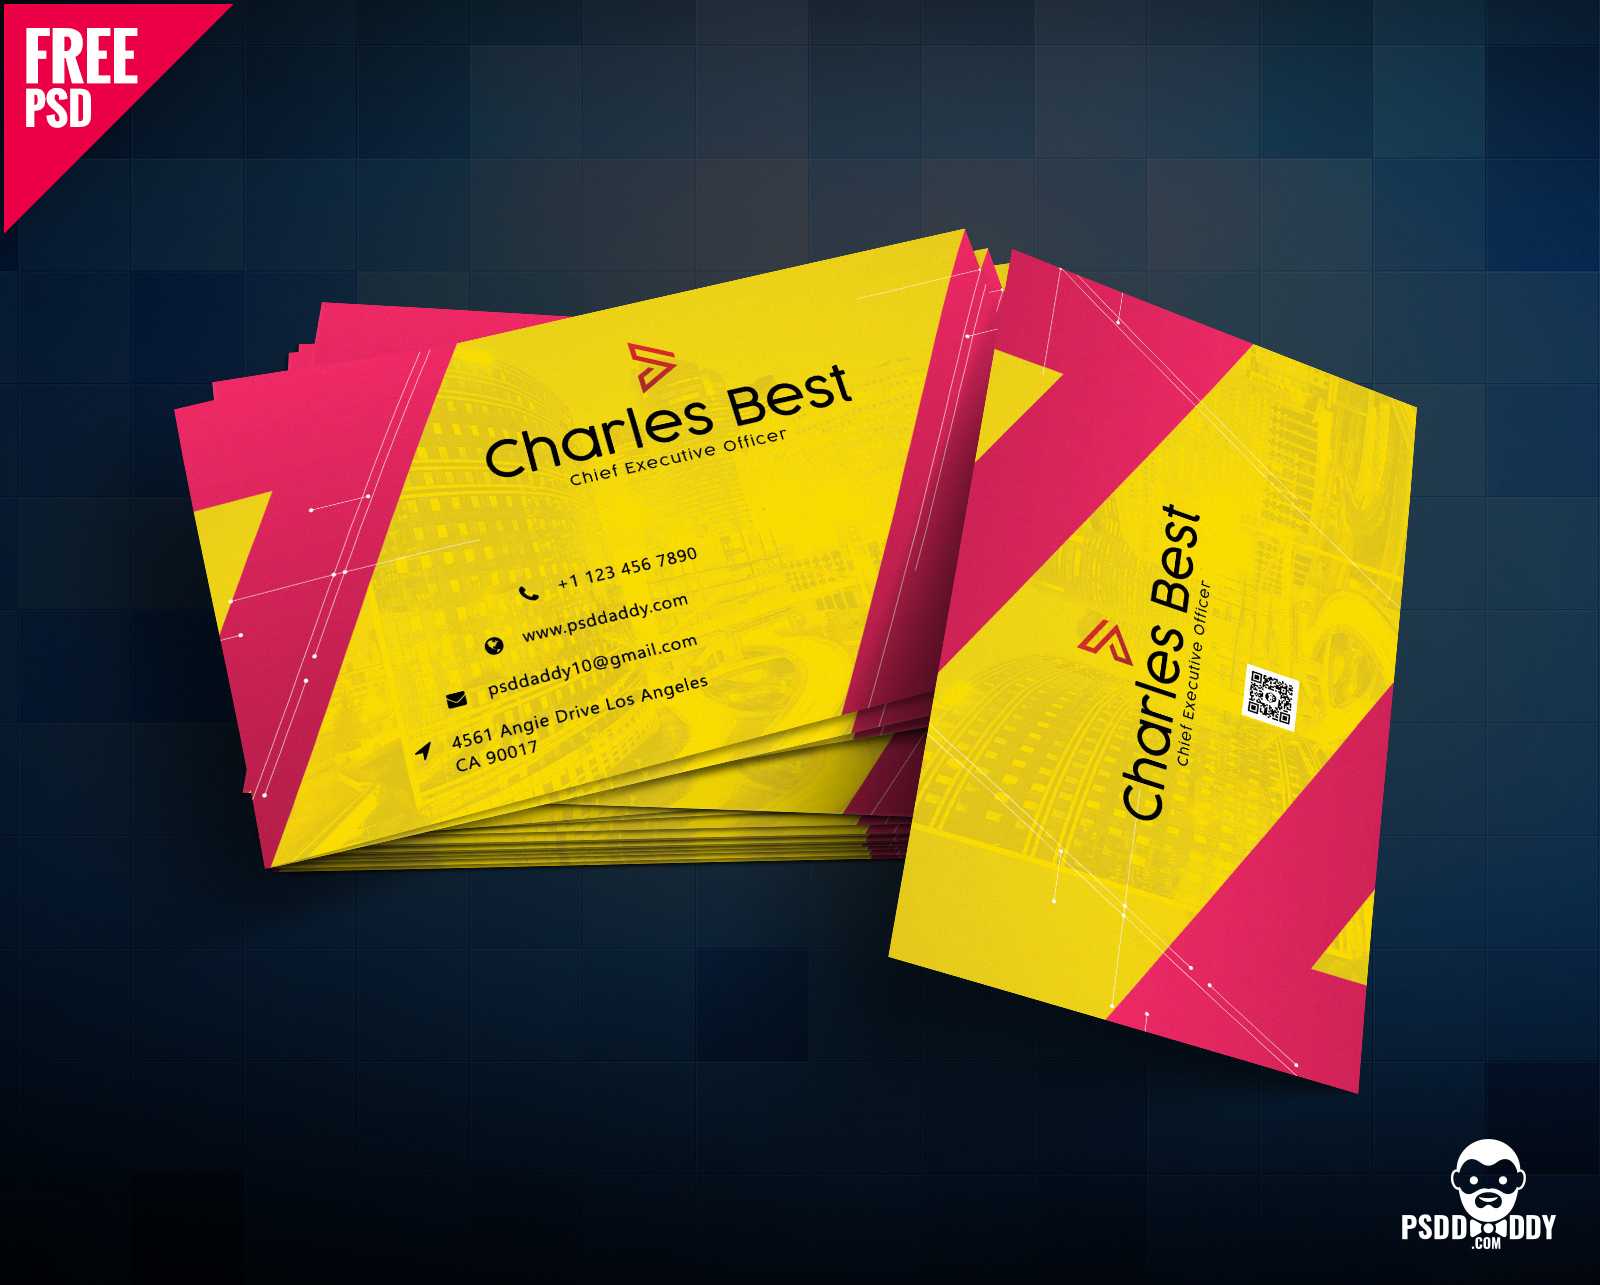 Download] Creative Business Card Free Psd | Psddaddy Intended For Visiting Card Template Psd Free Download